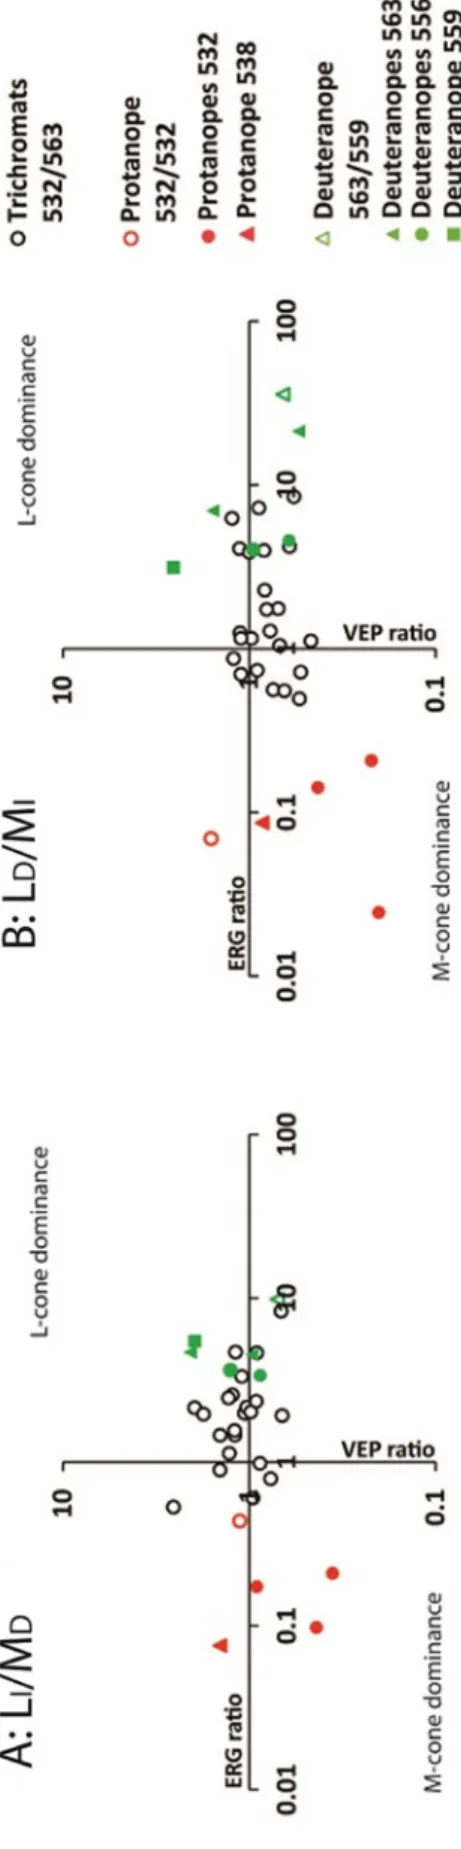 Fig. 5. ERG and VEP ratios for L I /M D (A) and for L D /M I (B). Black opened dots are results from 23 trichromats